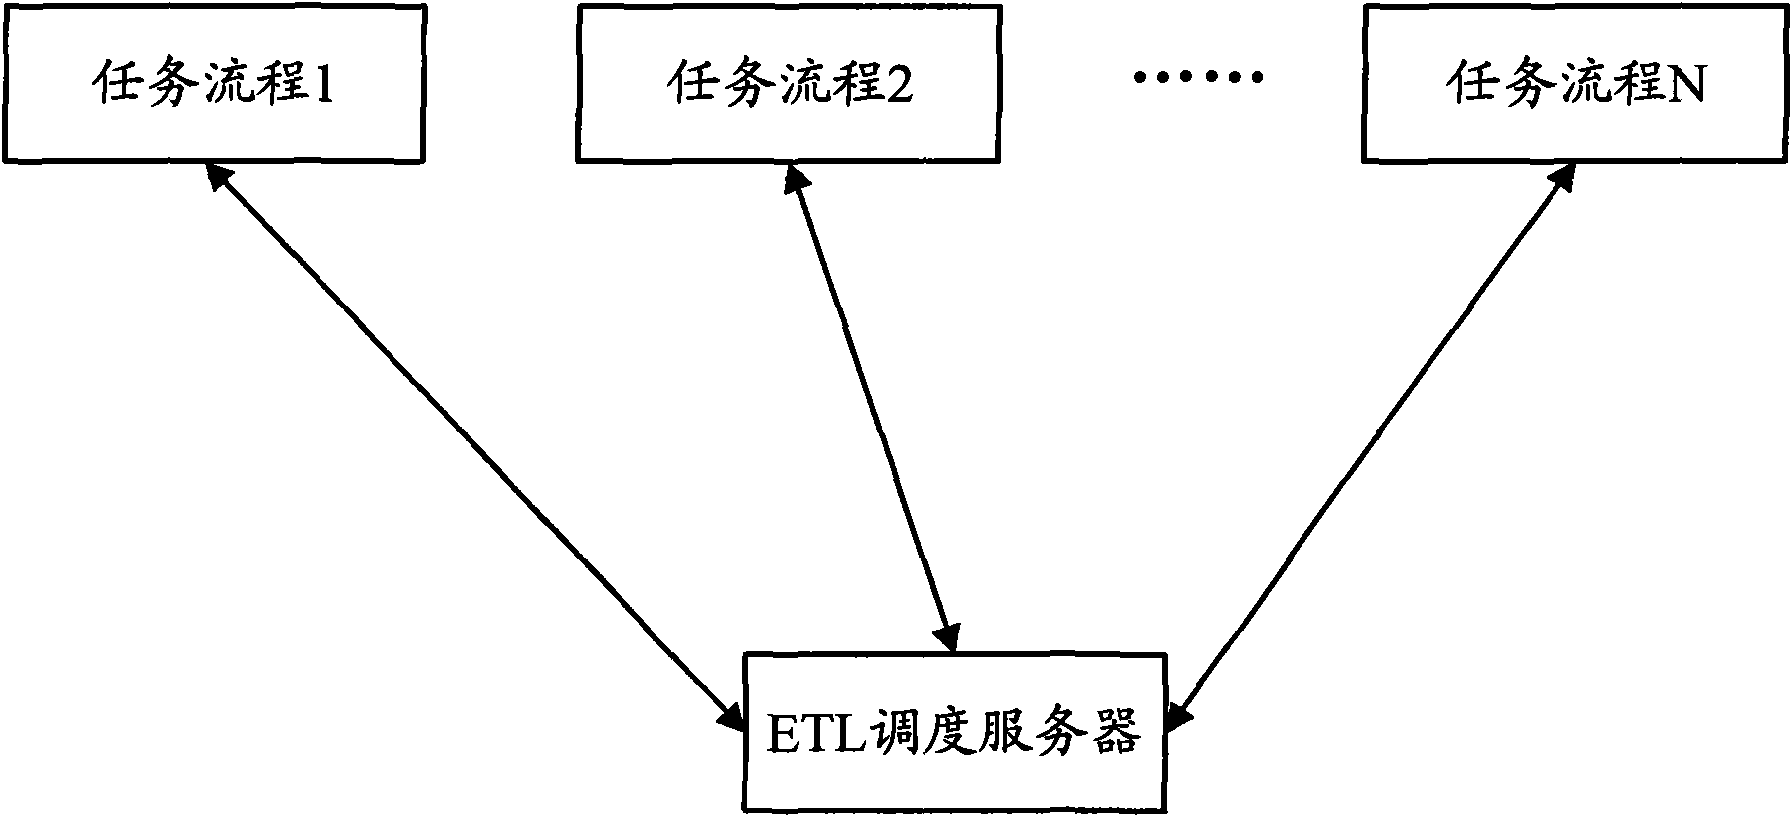 Method and apparatus for implementing ETL scheduling